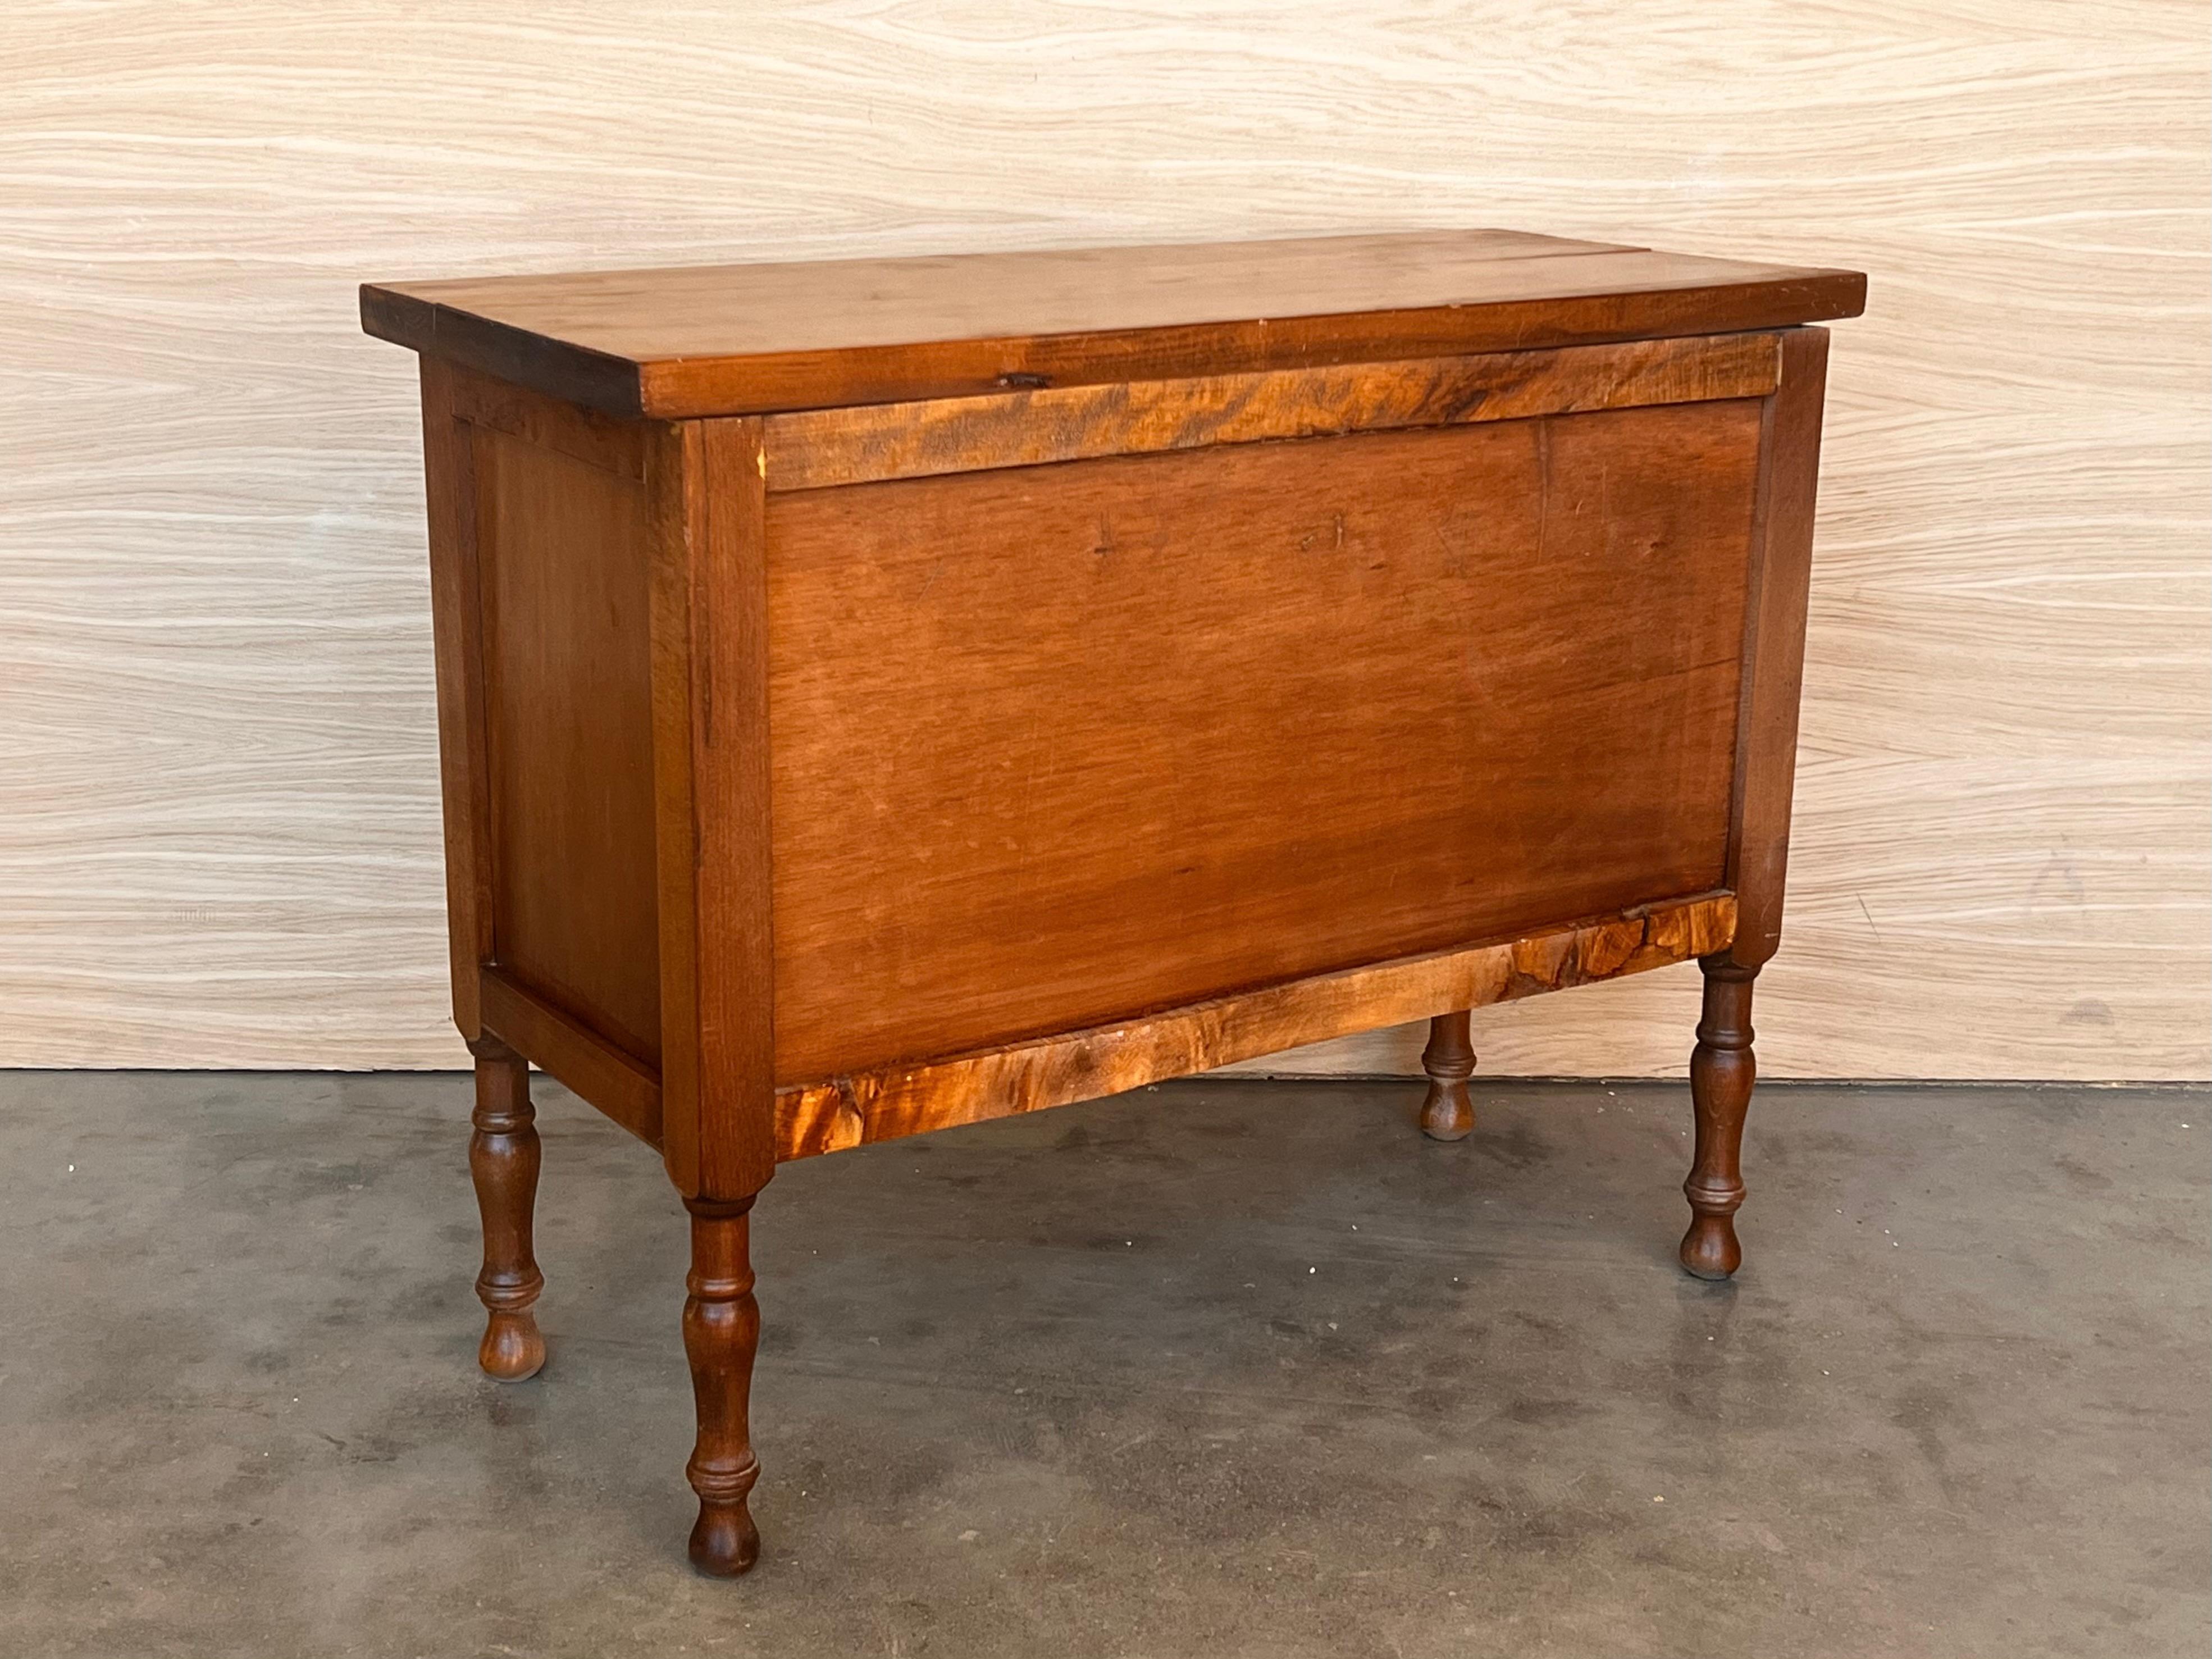 19th Century Catalan Spanish Carved Walnut Console Sofa Table, Three Drawers For Sale 4